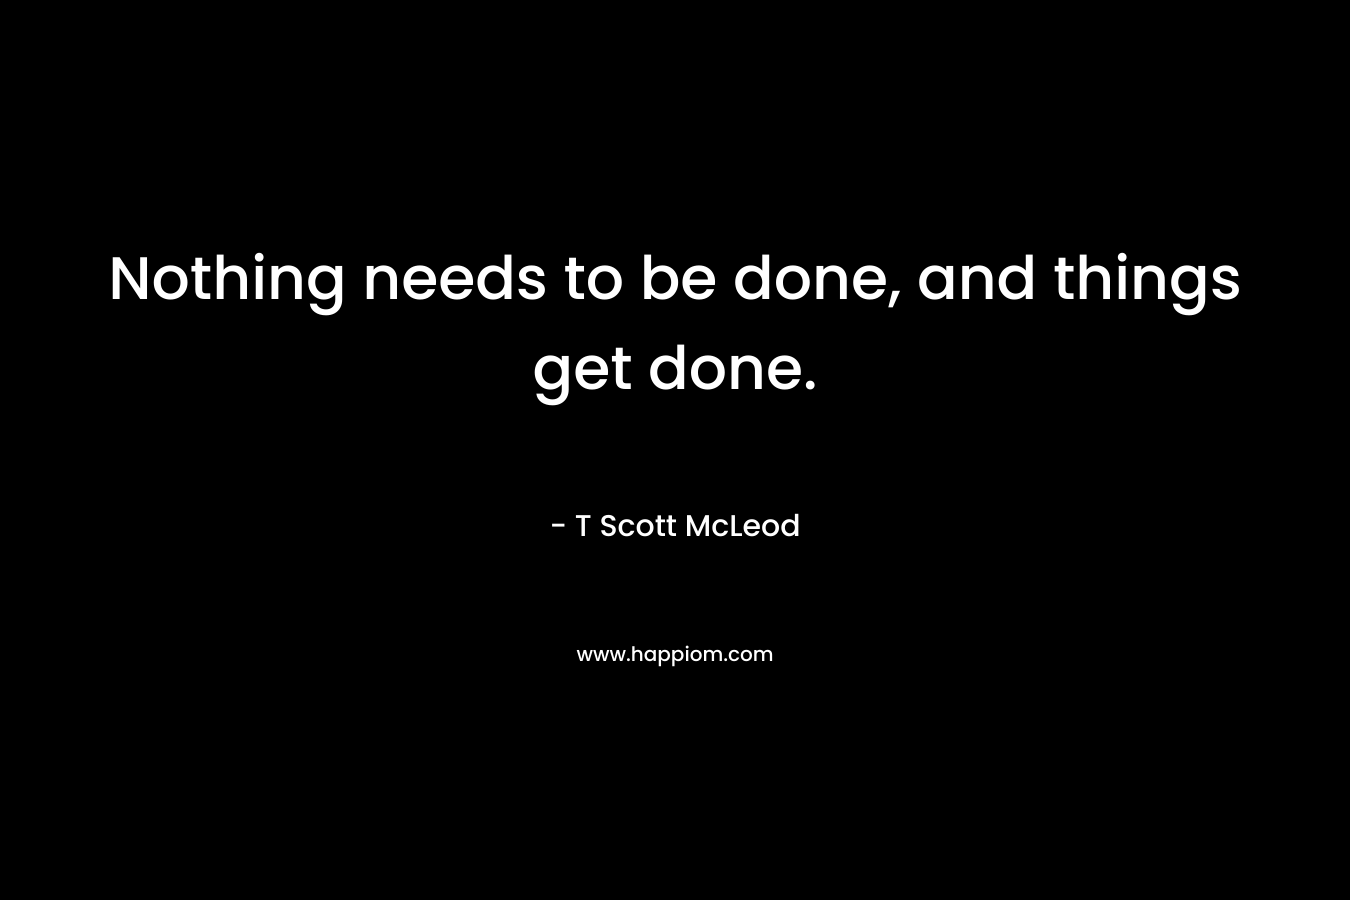 Nothing needs to be done, and things get done.